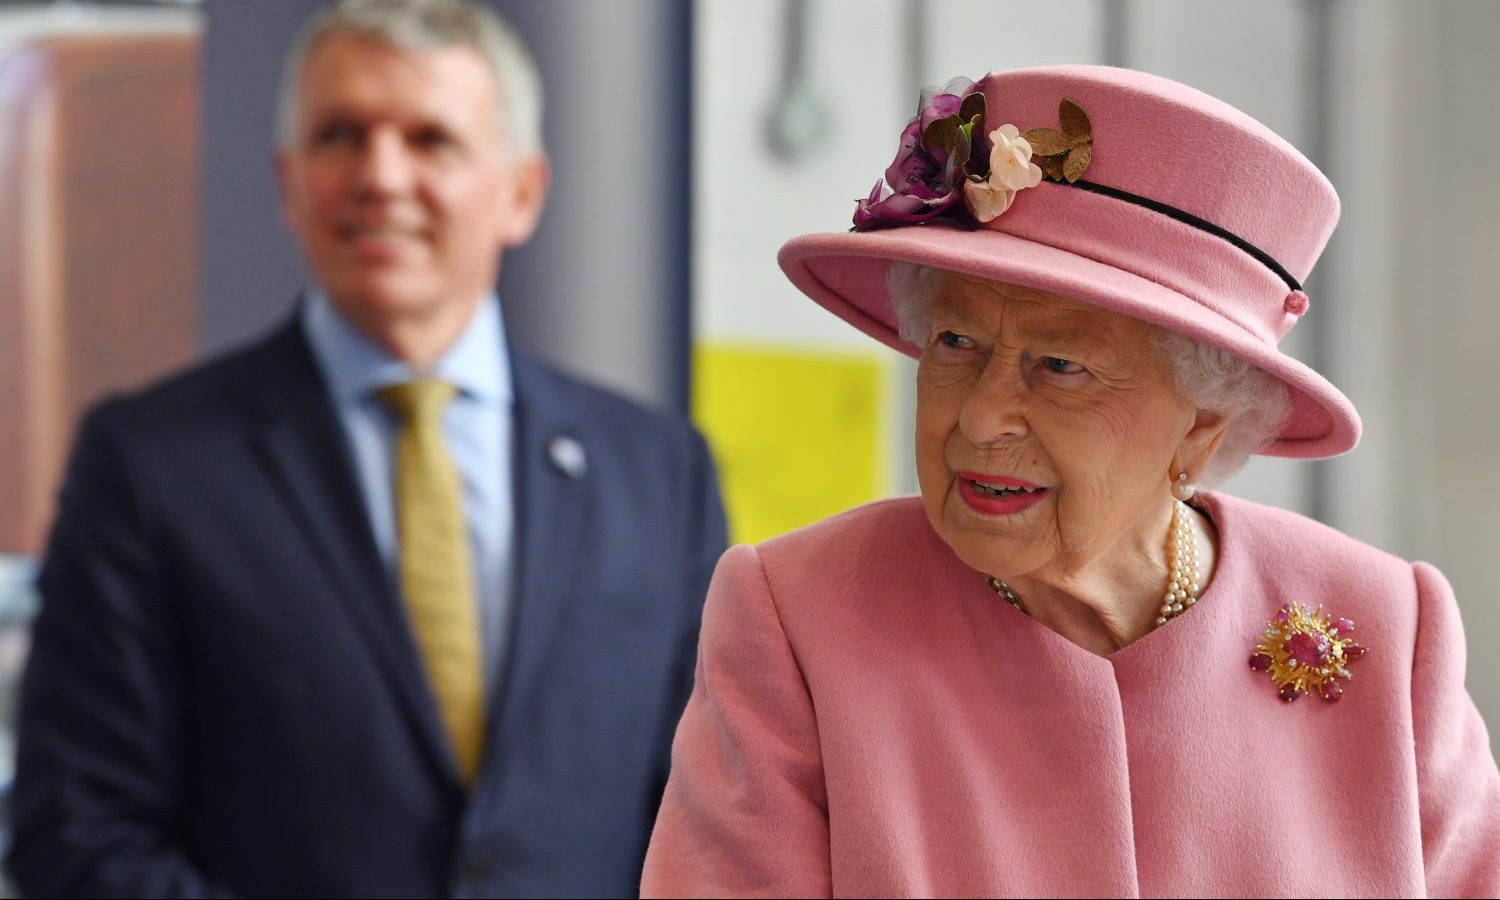 The Queen's First In-Person Visit Since March Has Sparked Outrage — Here's Why